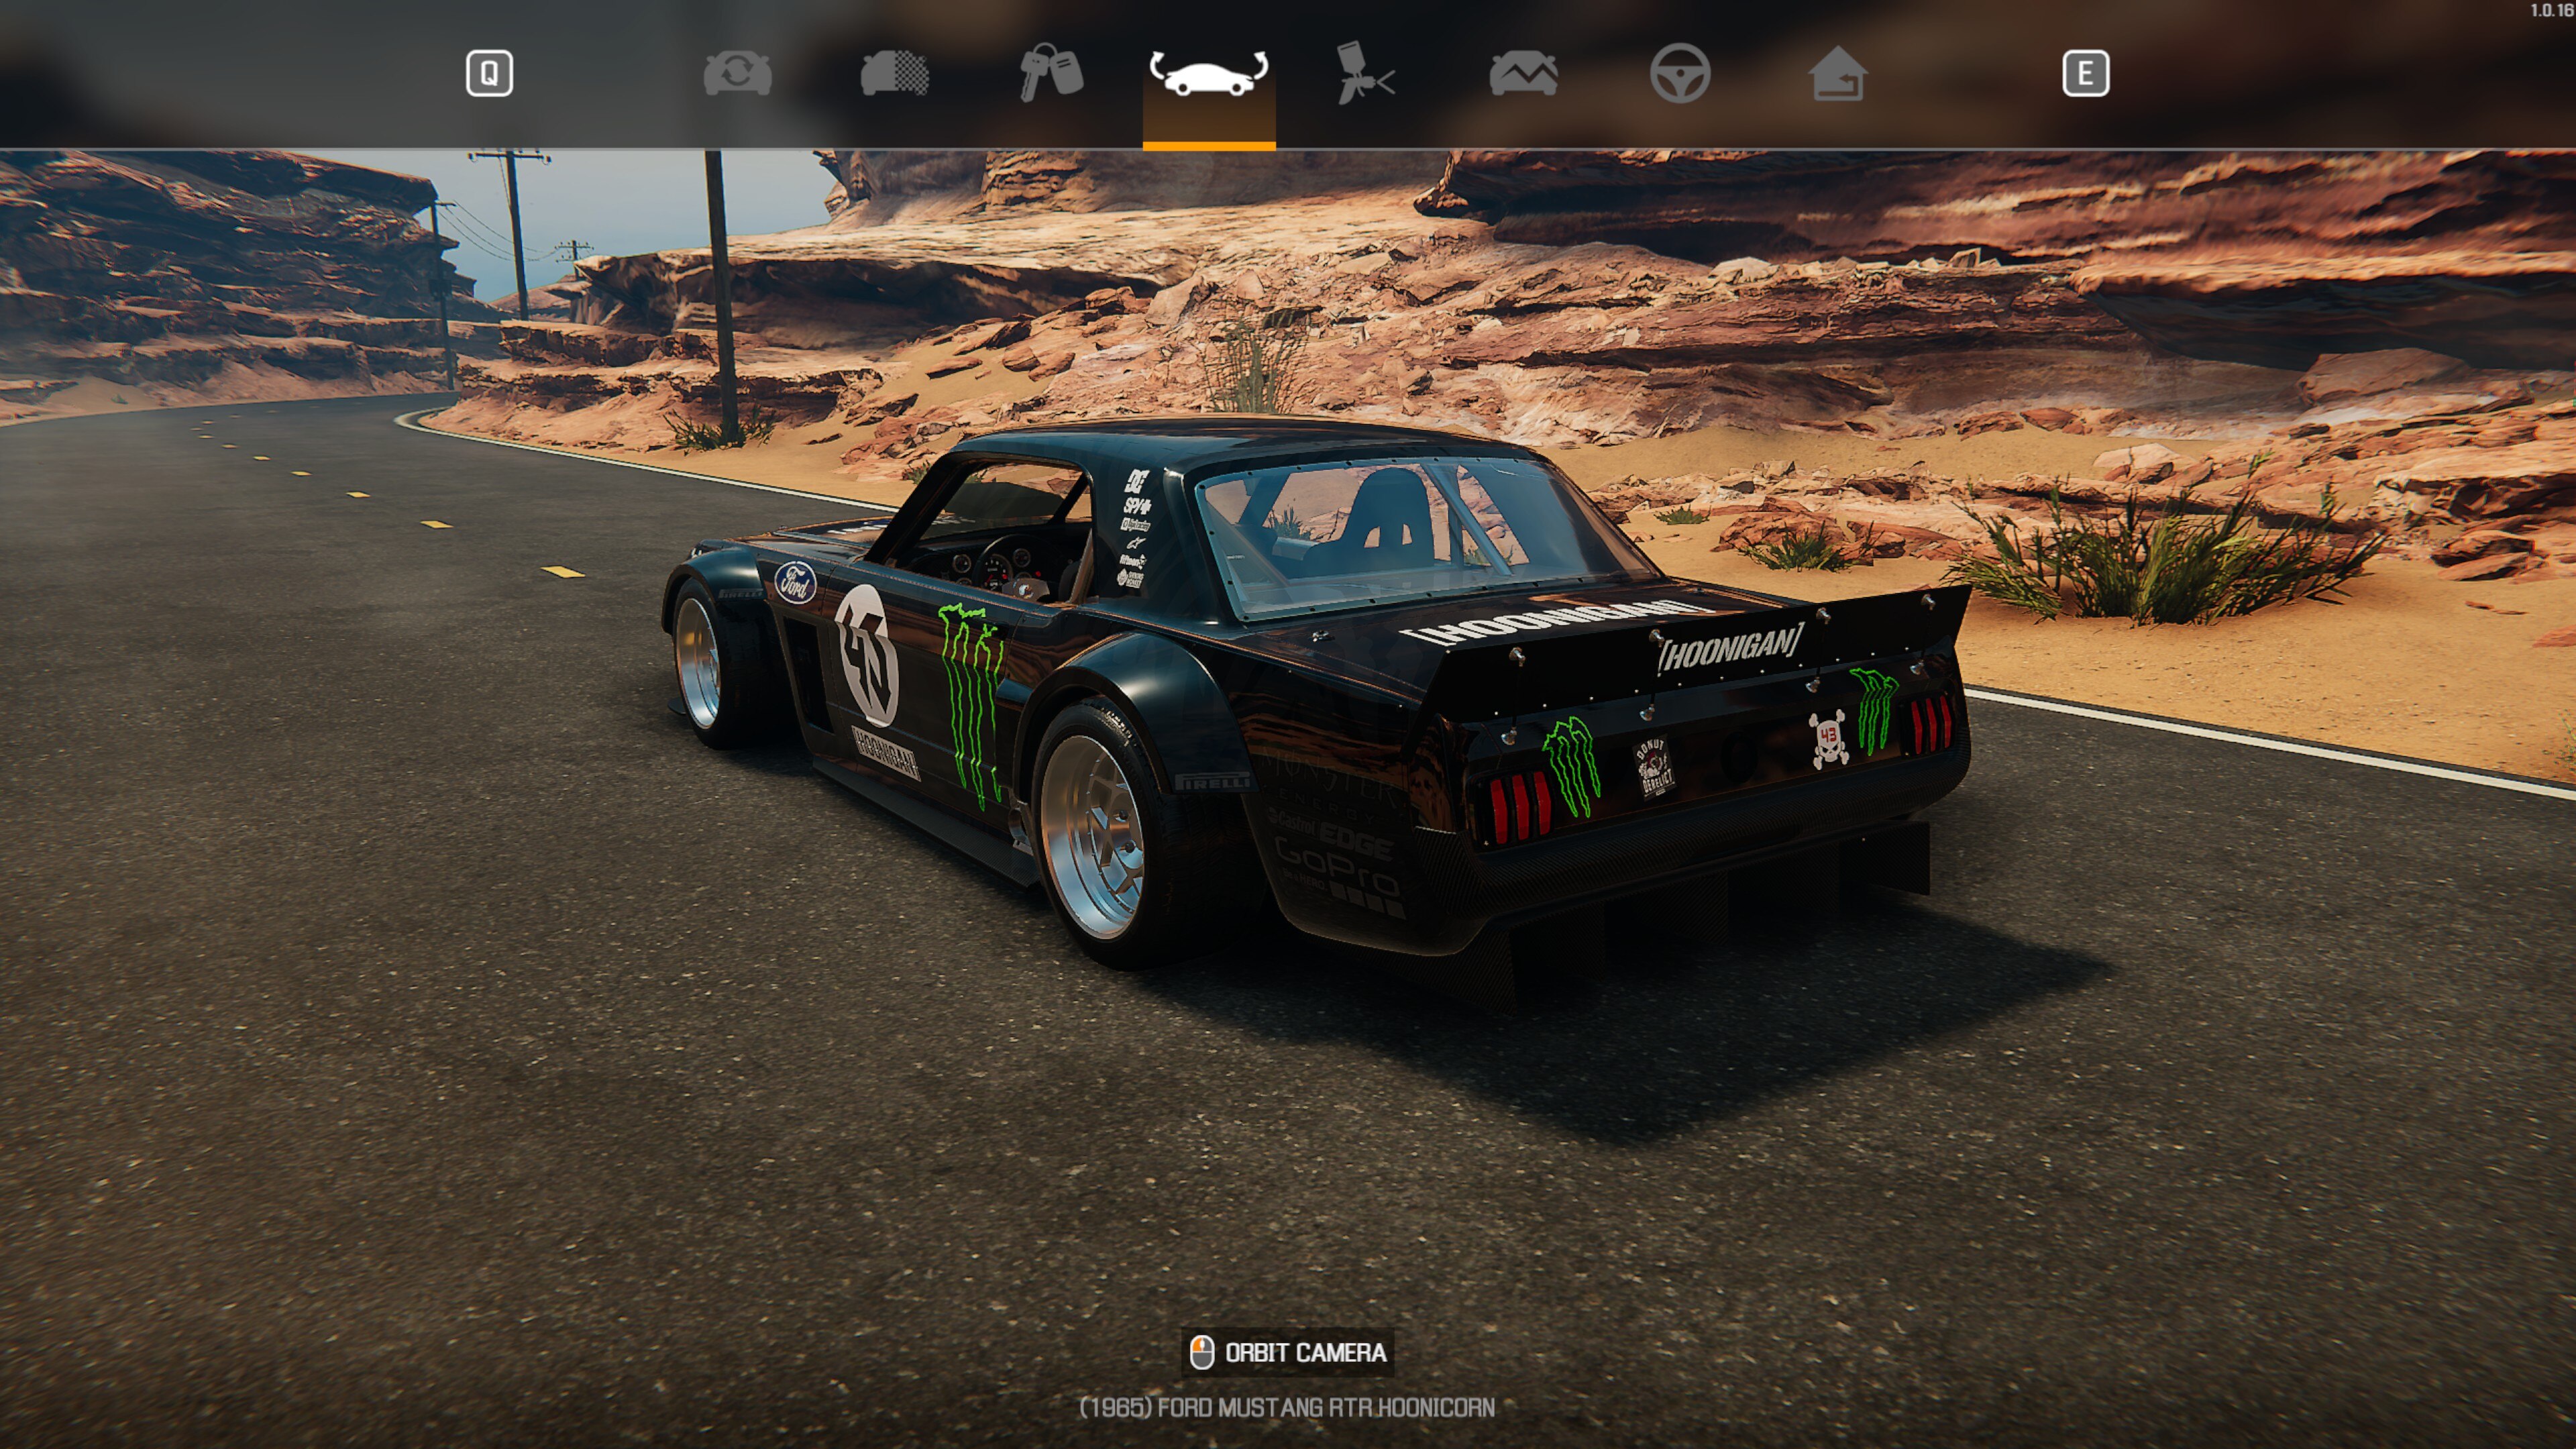 Need for Speed Payback features a derelict 1965 Ford Mustang you